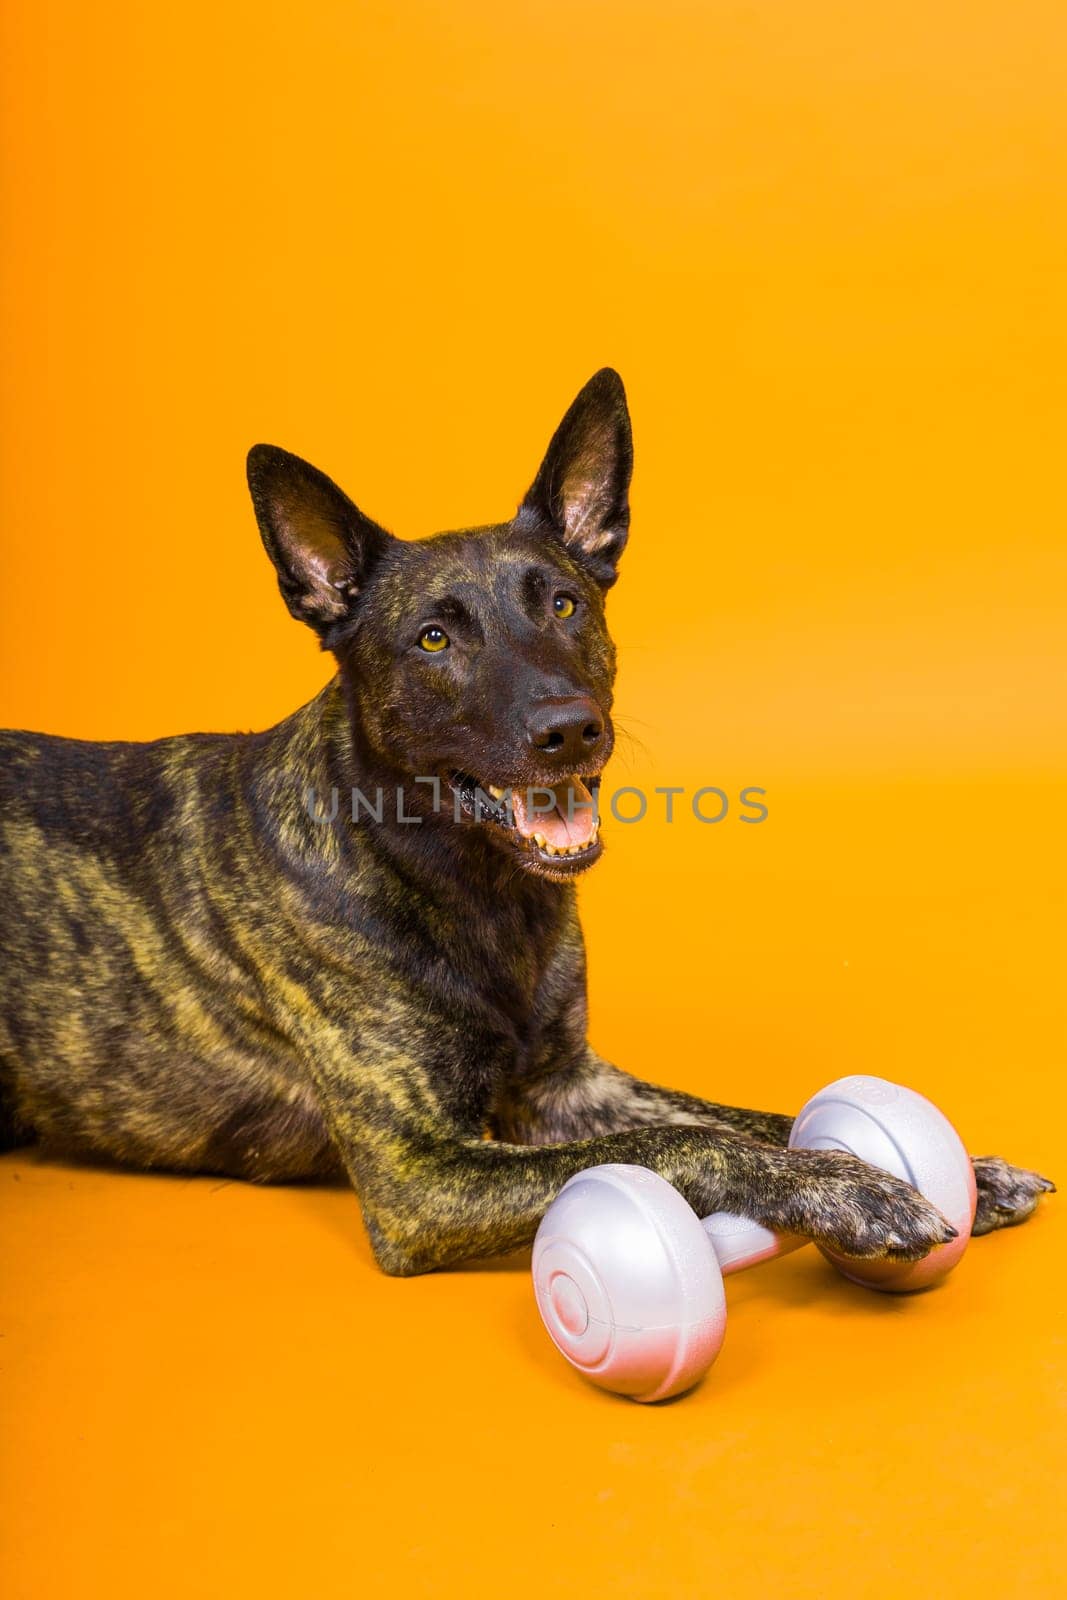 Dutch Shepherd holding dumbbell on a red and yellow background